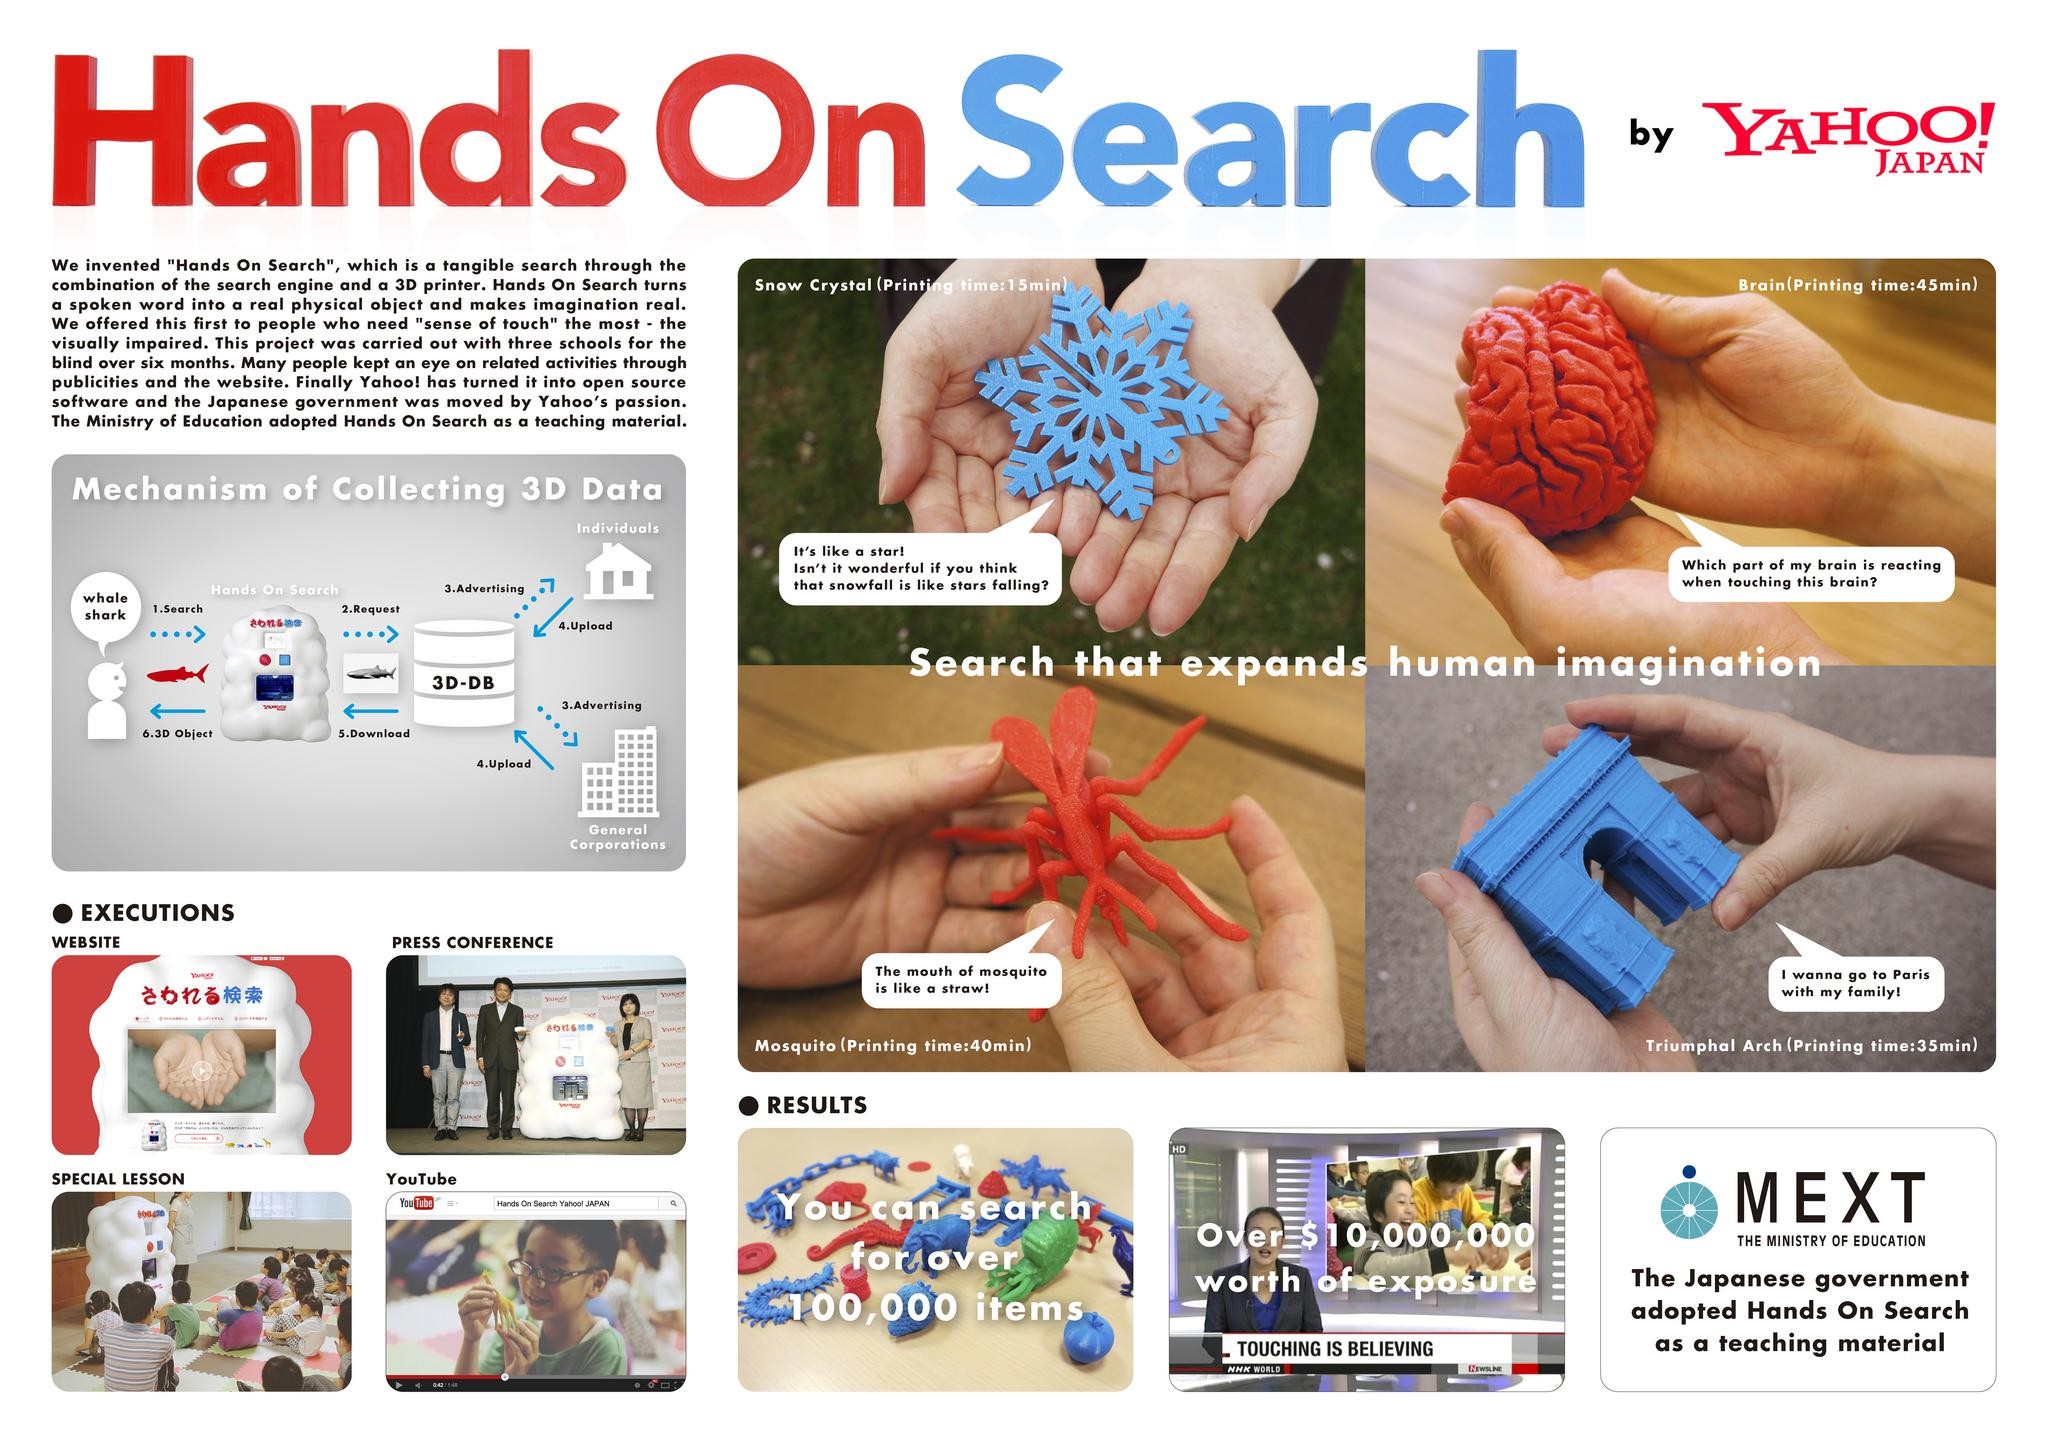 HANDS ON SEARCH